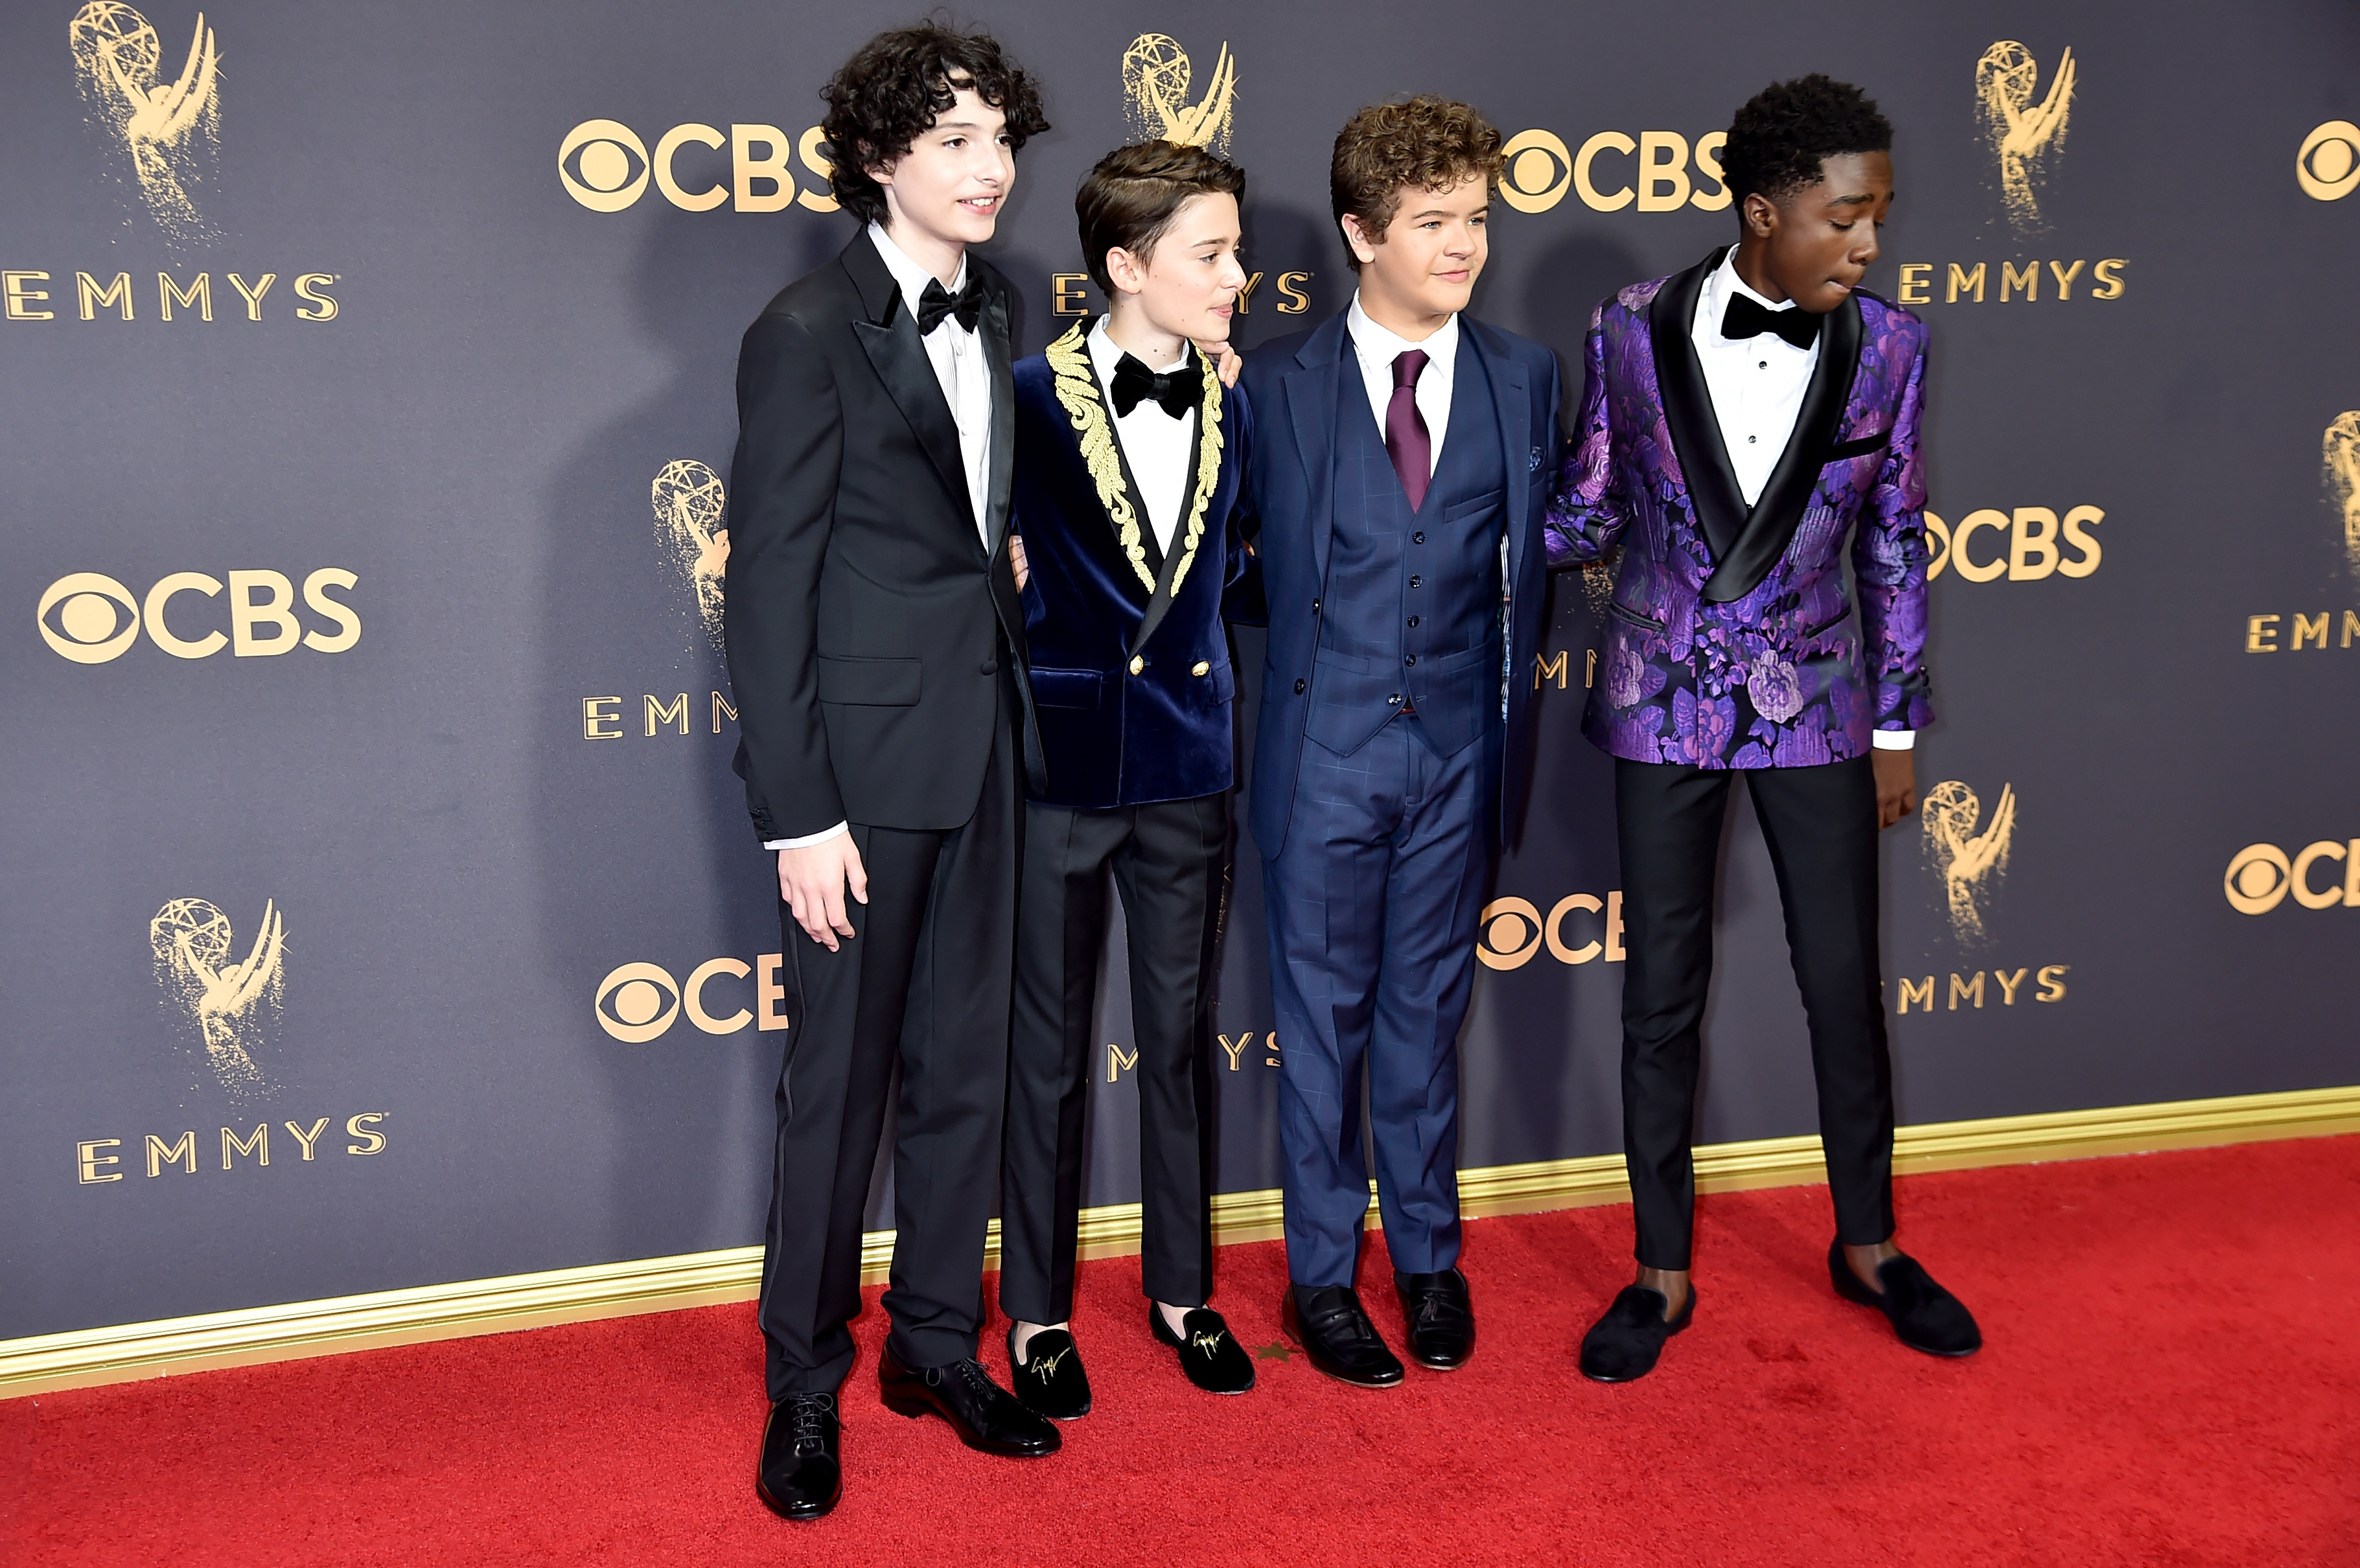 Emmys 2017: Stranger Things Kids Show on the Red Carpet